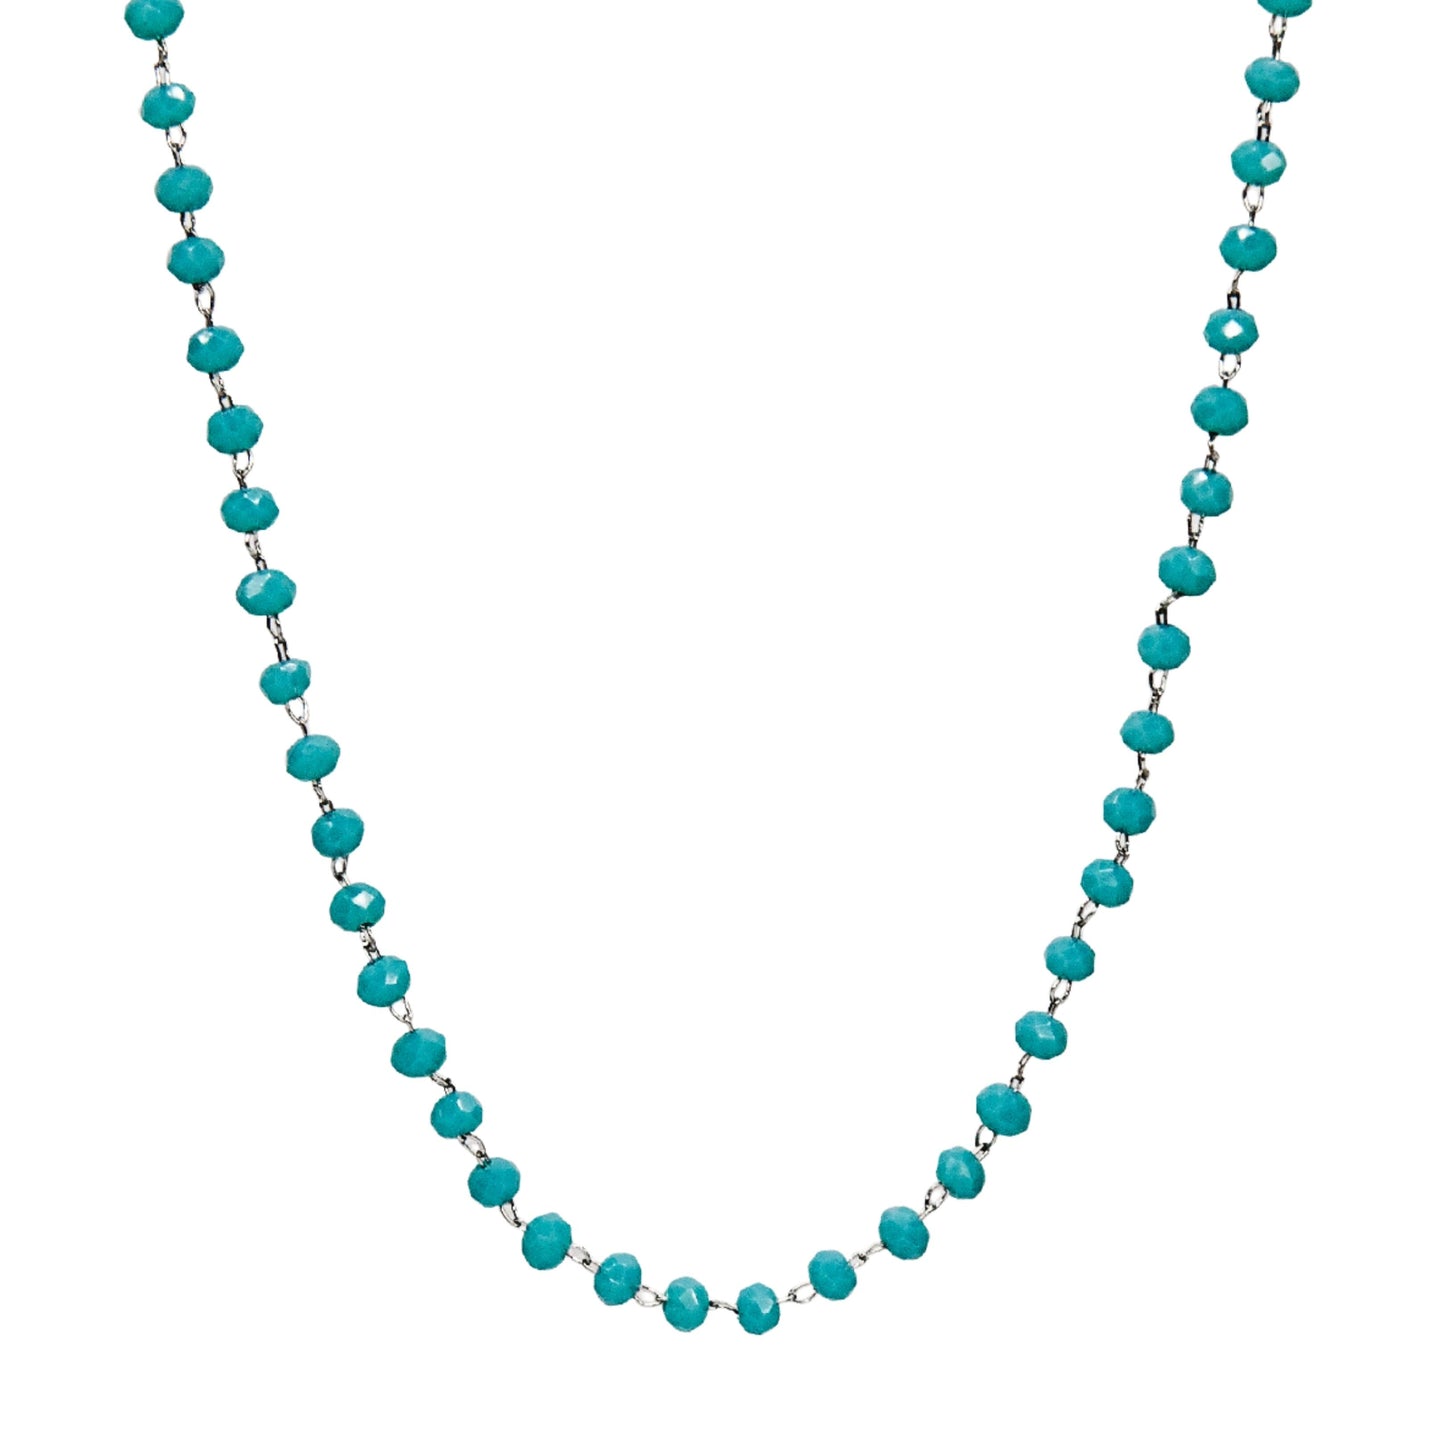 Delicate Crystal Bead Necklace - Turquoise